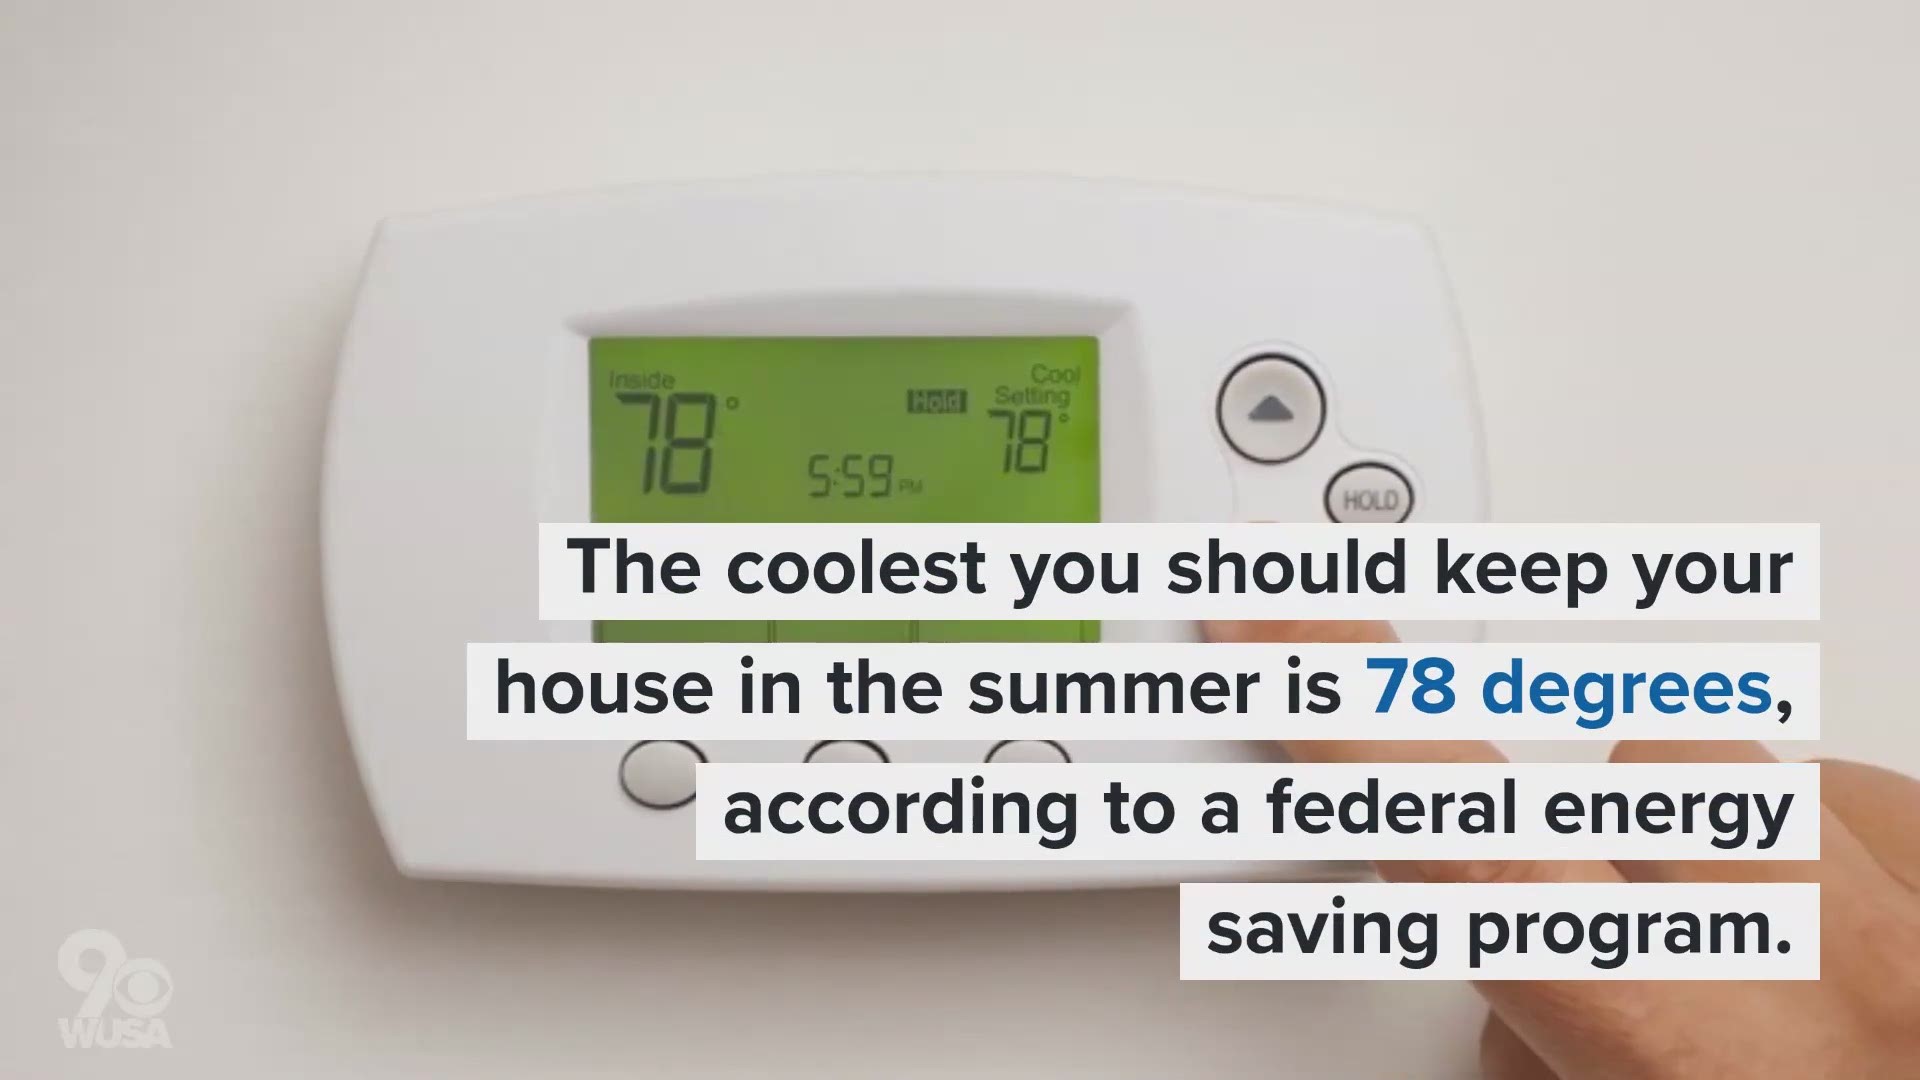 Despite the Office of Energy Efficiency and Renewable Energy being in the swampy heat of DC,  their guidelines say you should keep the thermostat at 78 in the summer.